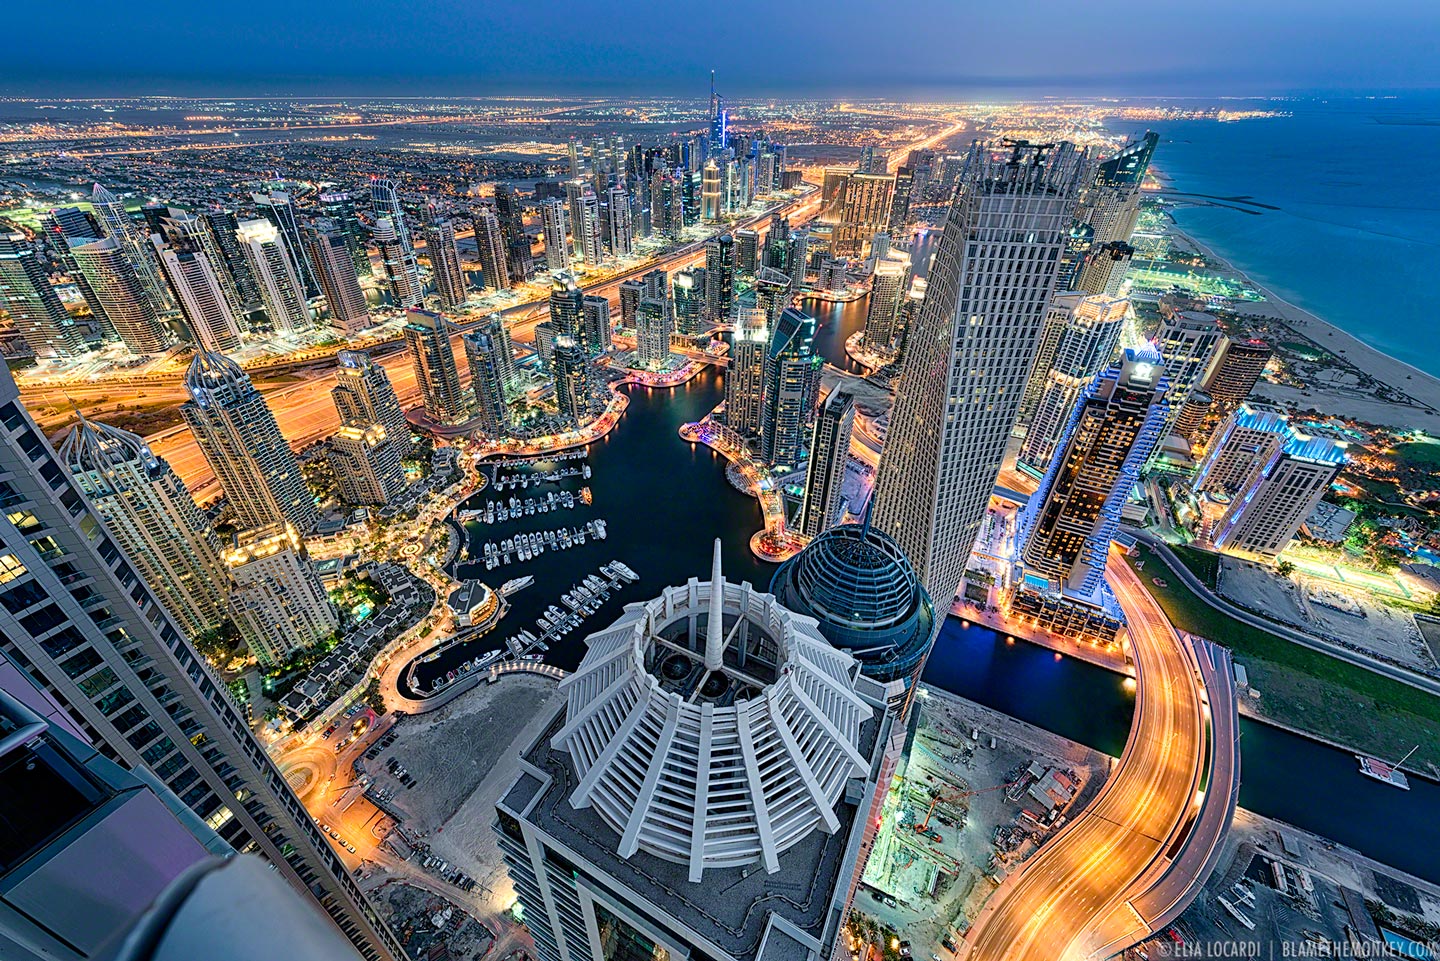 A staggering twilight view of the Dubai Marina from the 85th floor.